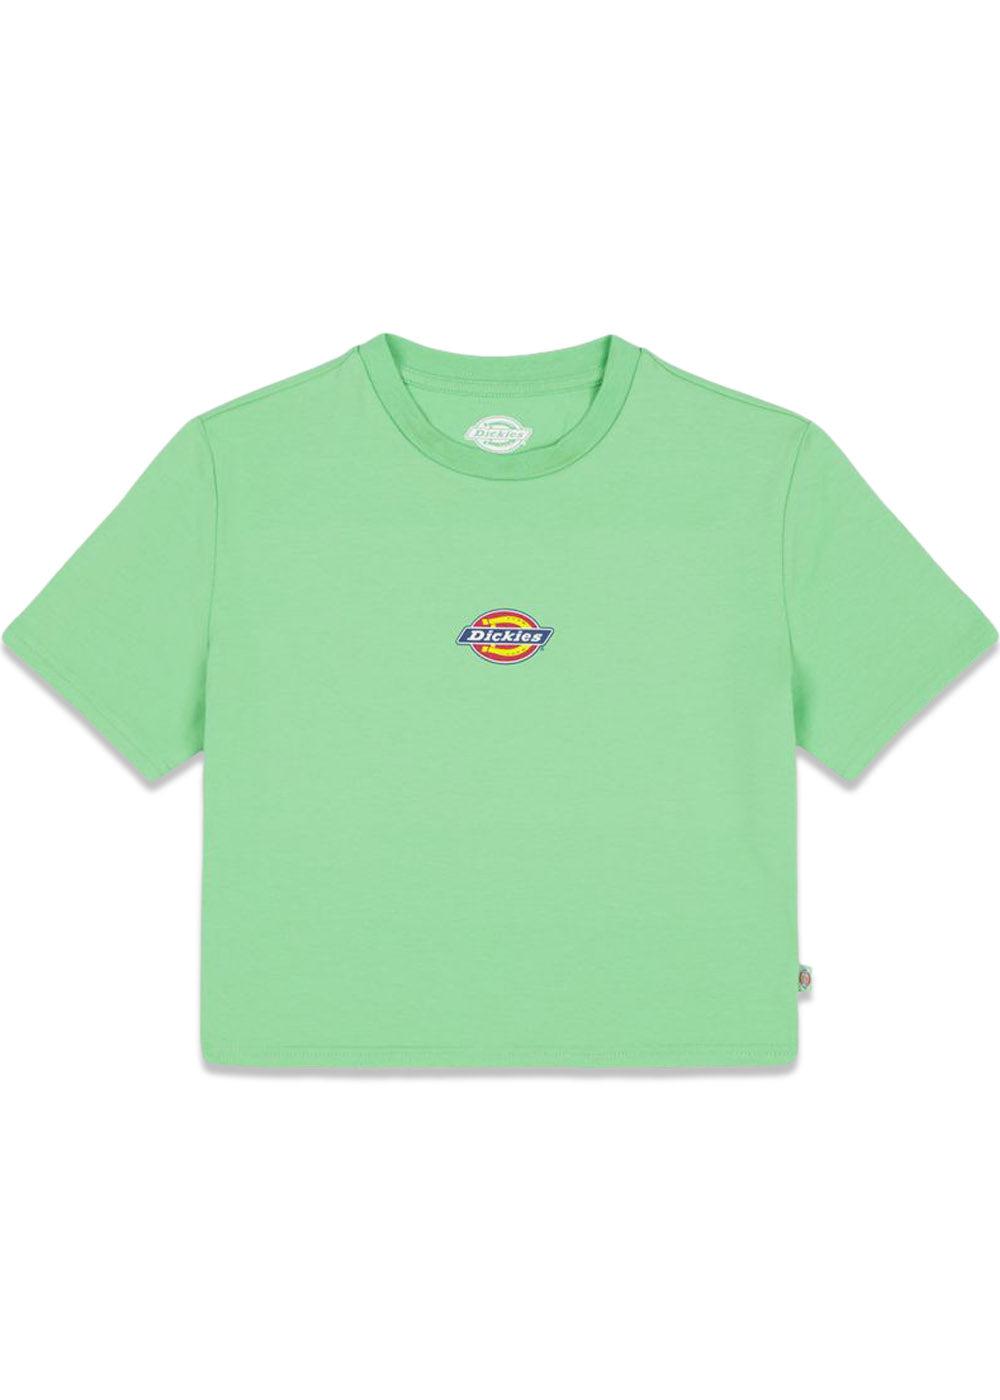 Dickies' maple valley tee - Apple Mint. Køb t-shirts her.